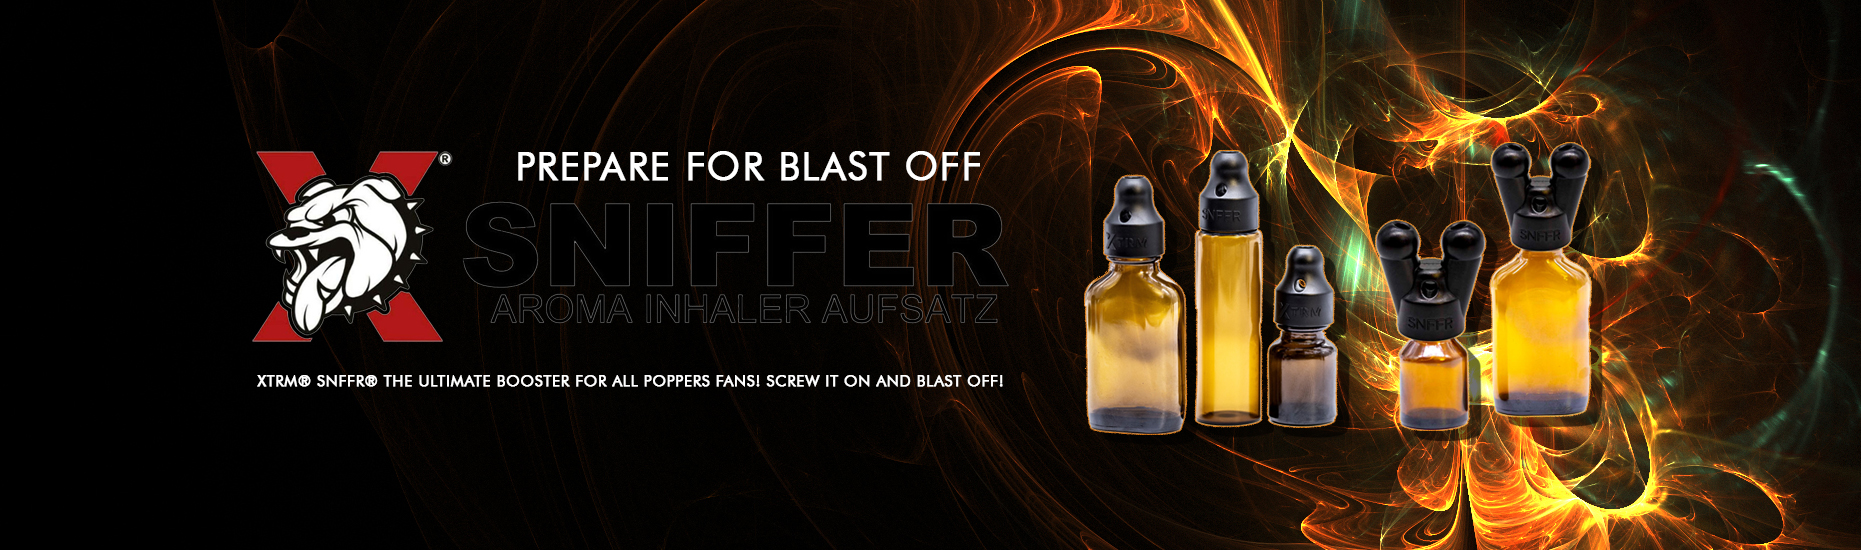 XTRM® SNFFR® the ultimate booster for all Poppers fans! Screw it on and Blast Off!